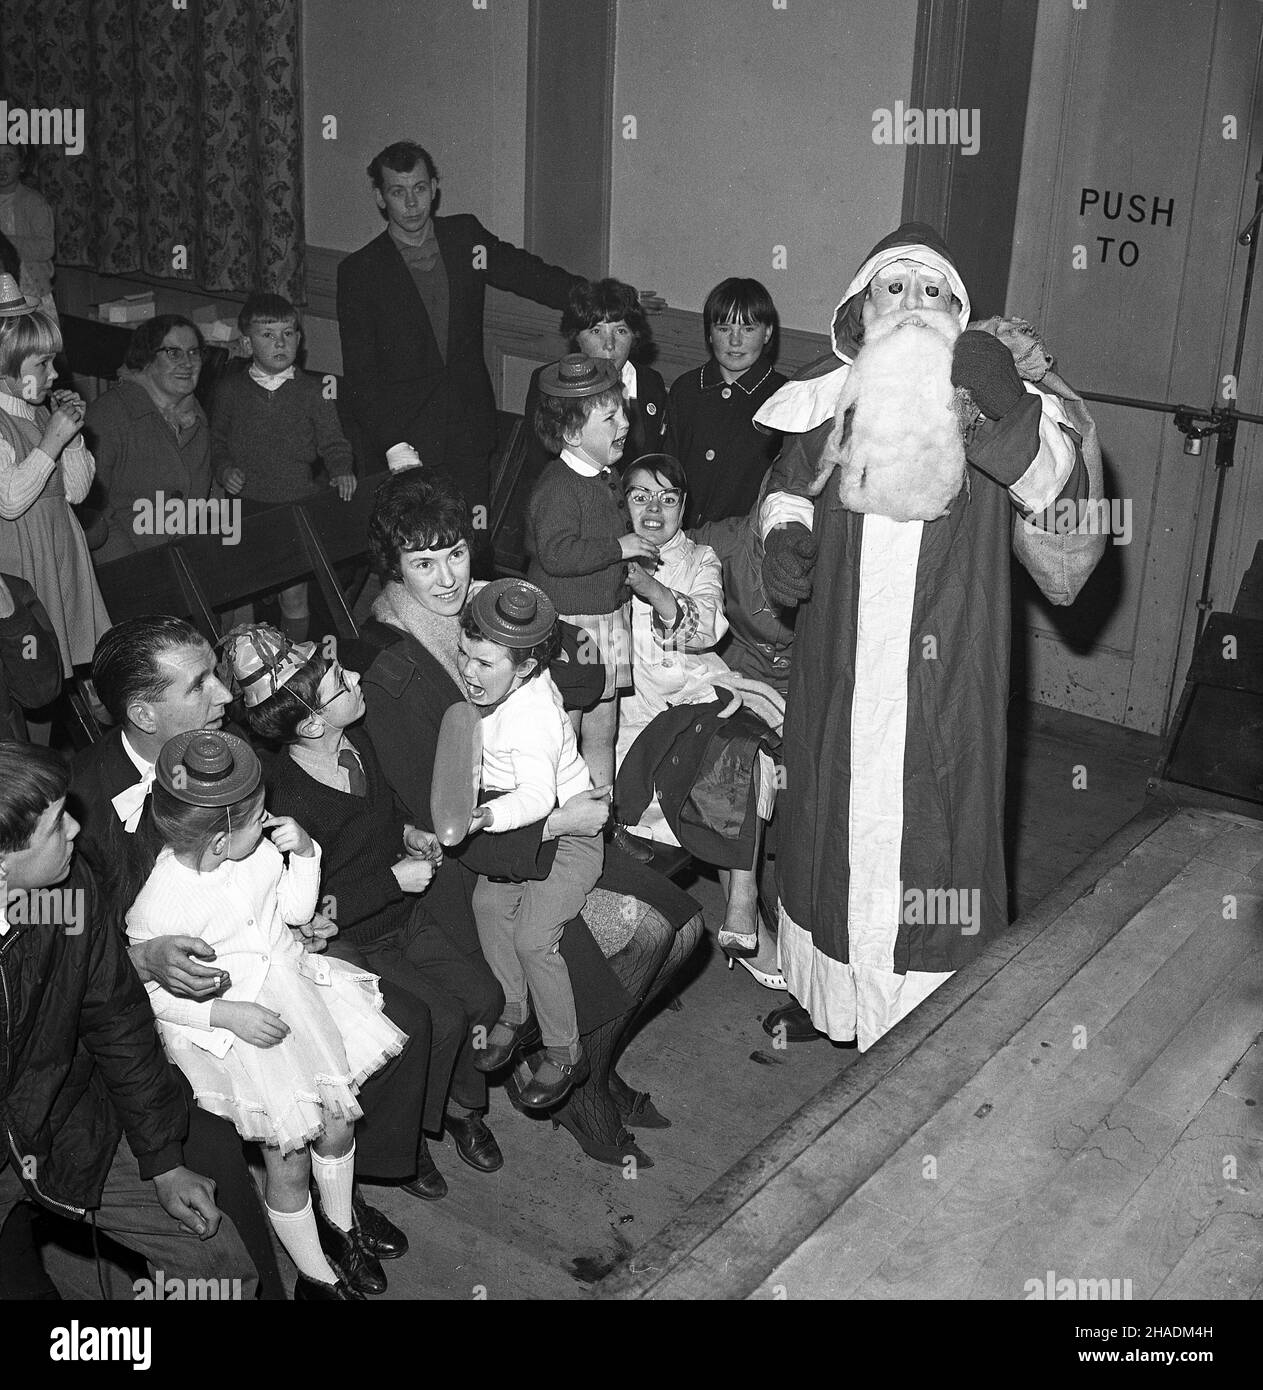 1965, historical, in a village hall, a scary santa claus, little girls held by their parents frightened by the a santa claus with a face mask and false beard, Fife, Scotland, UK Stock Photo